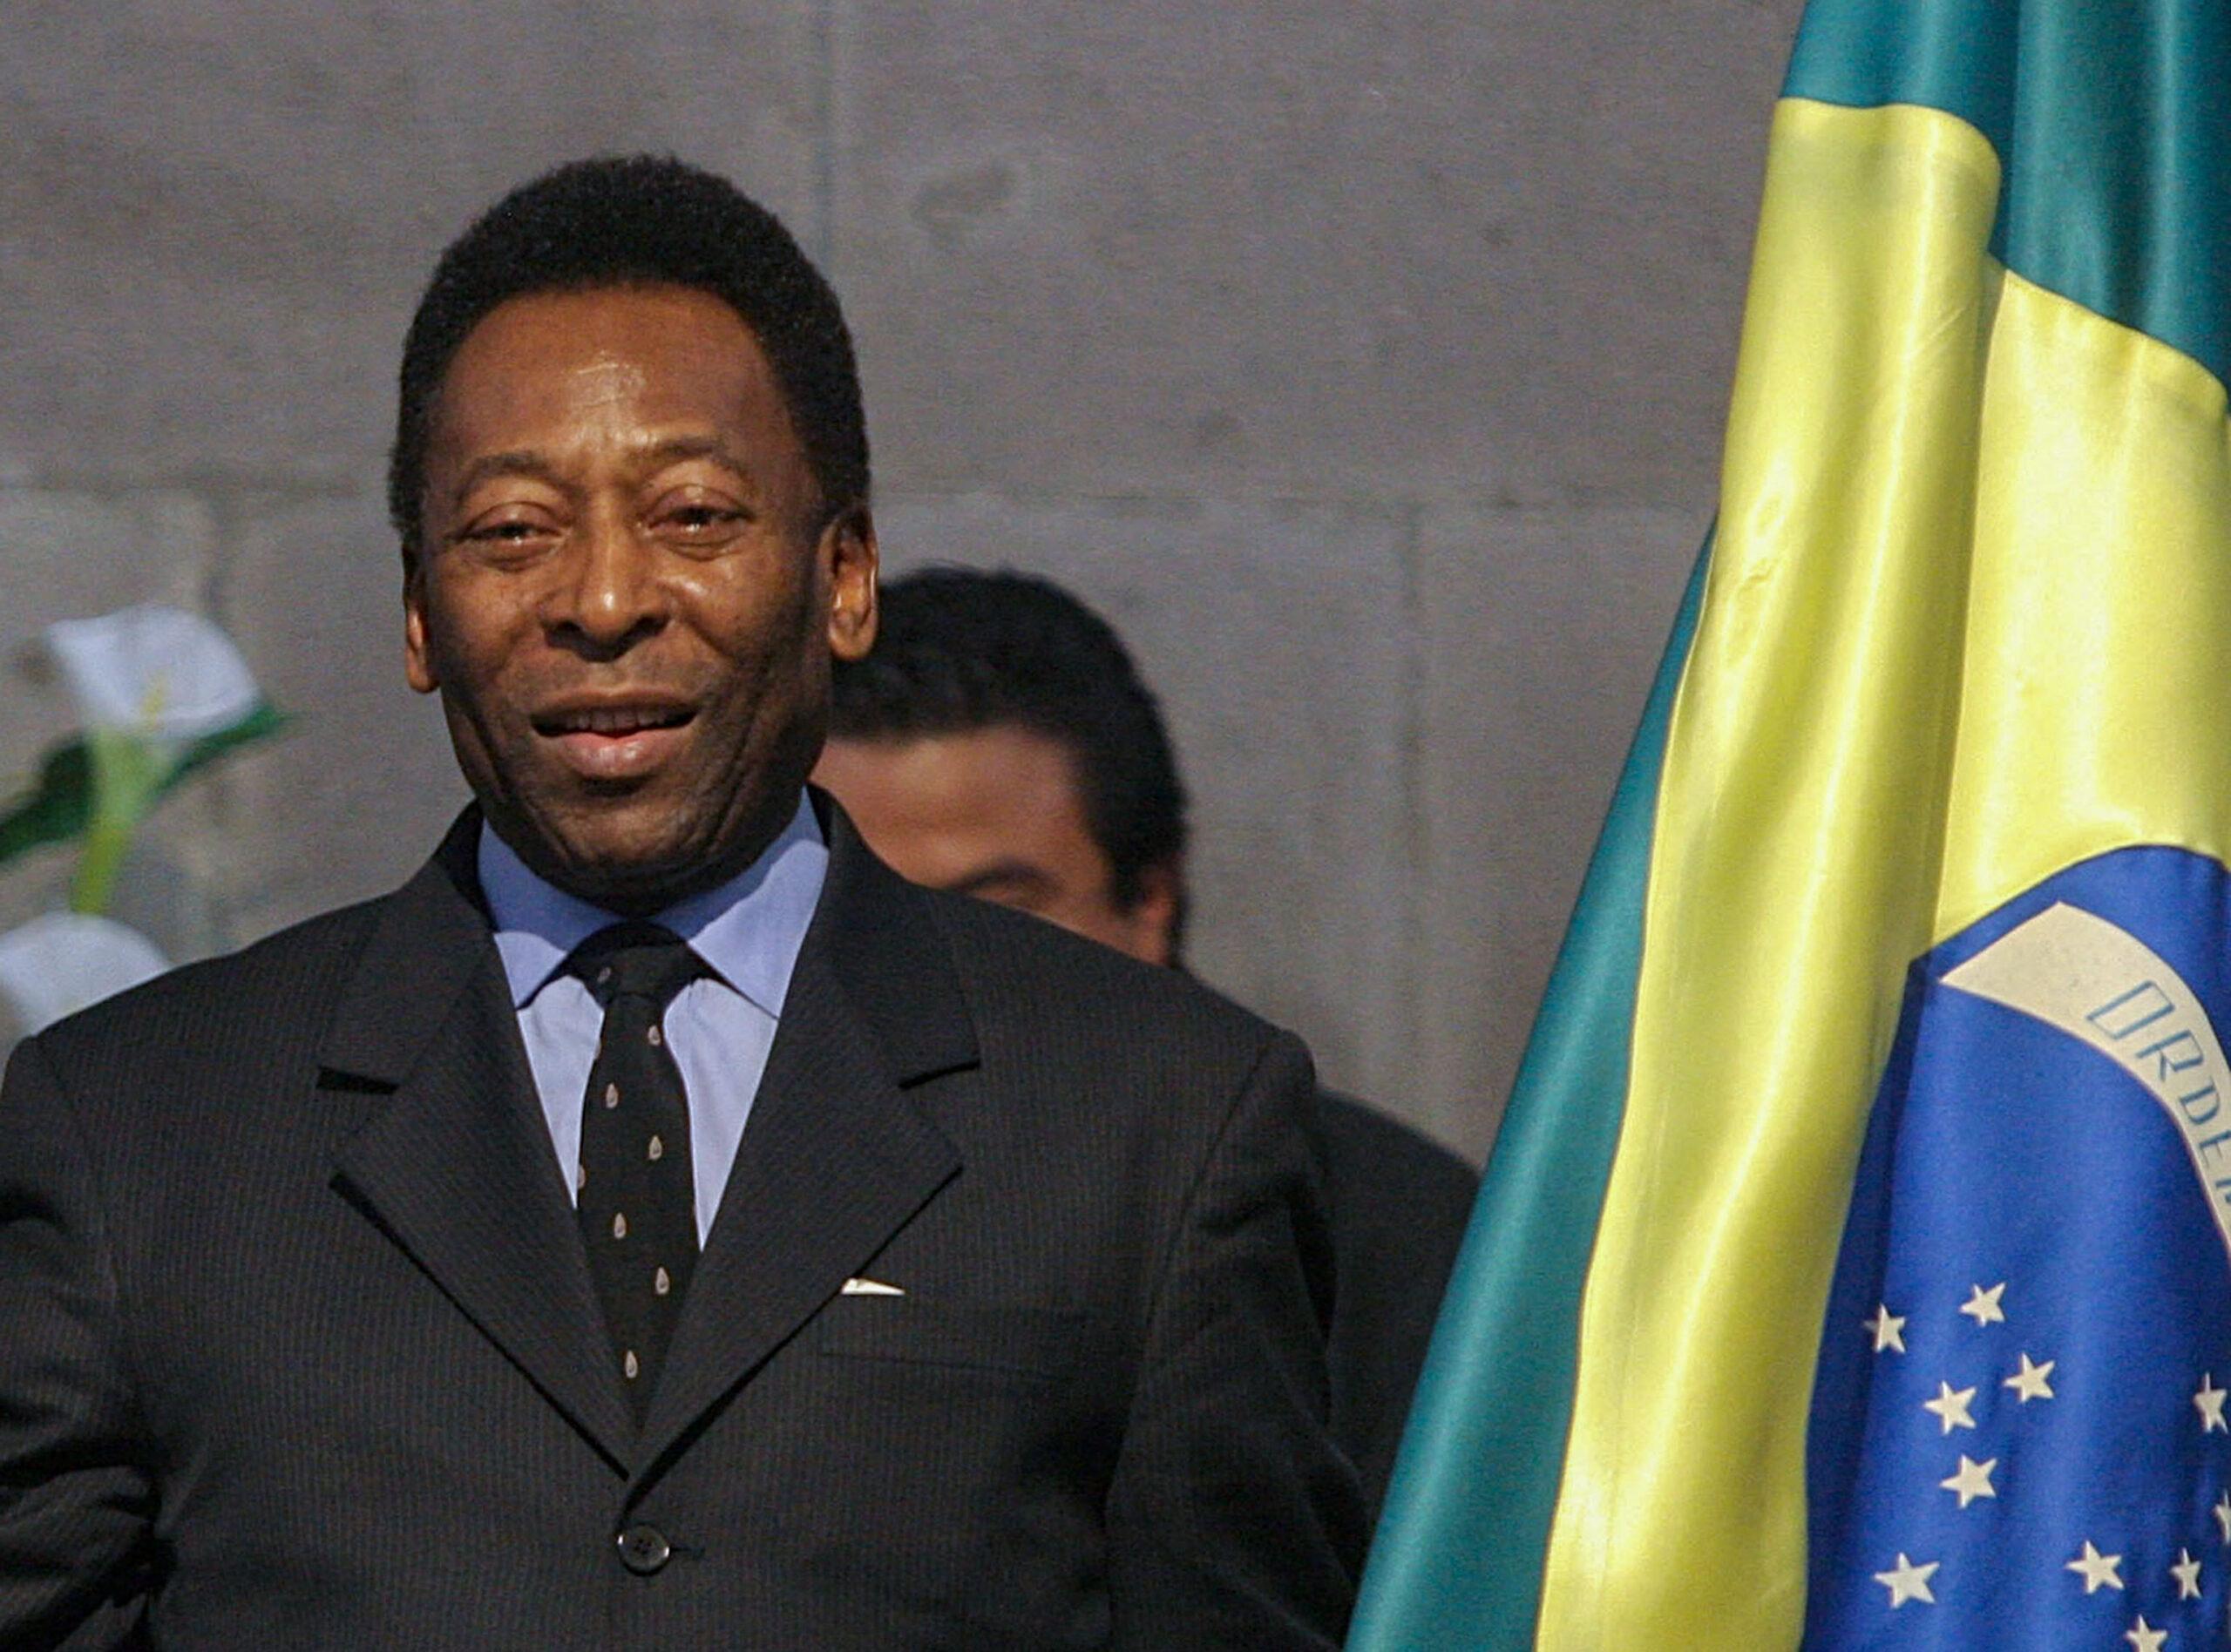 Brazilian soccer legend Pelé has died at the age of 82